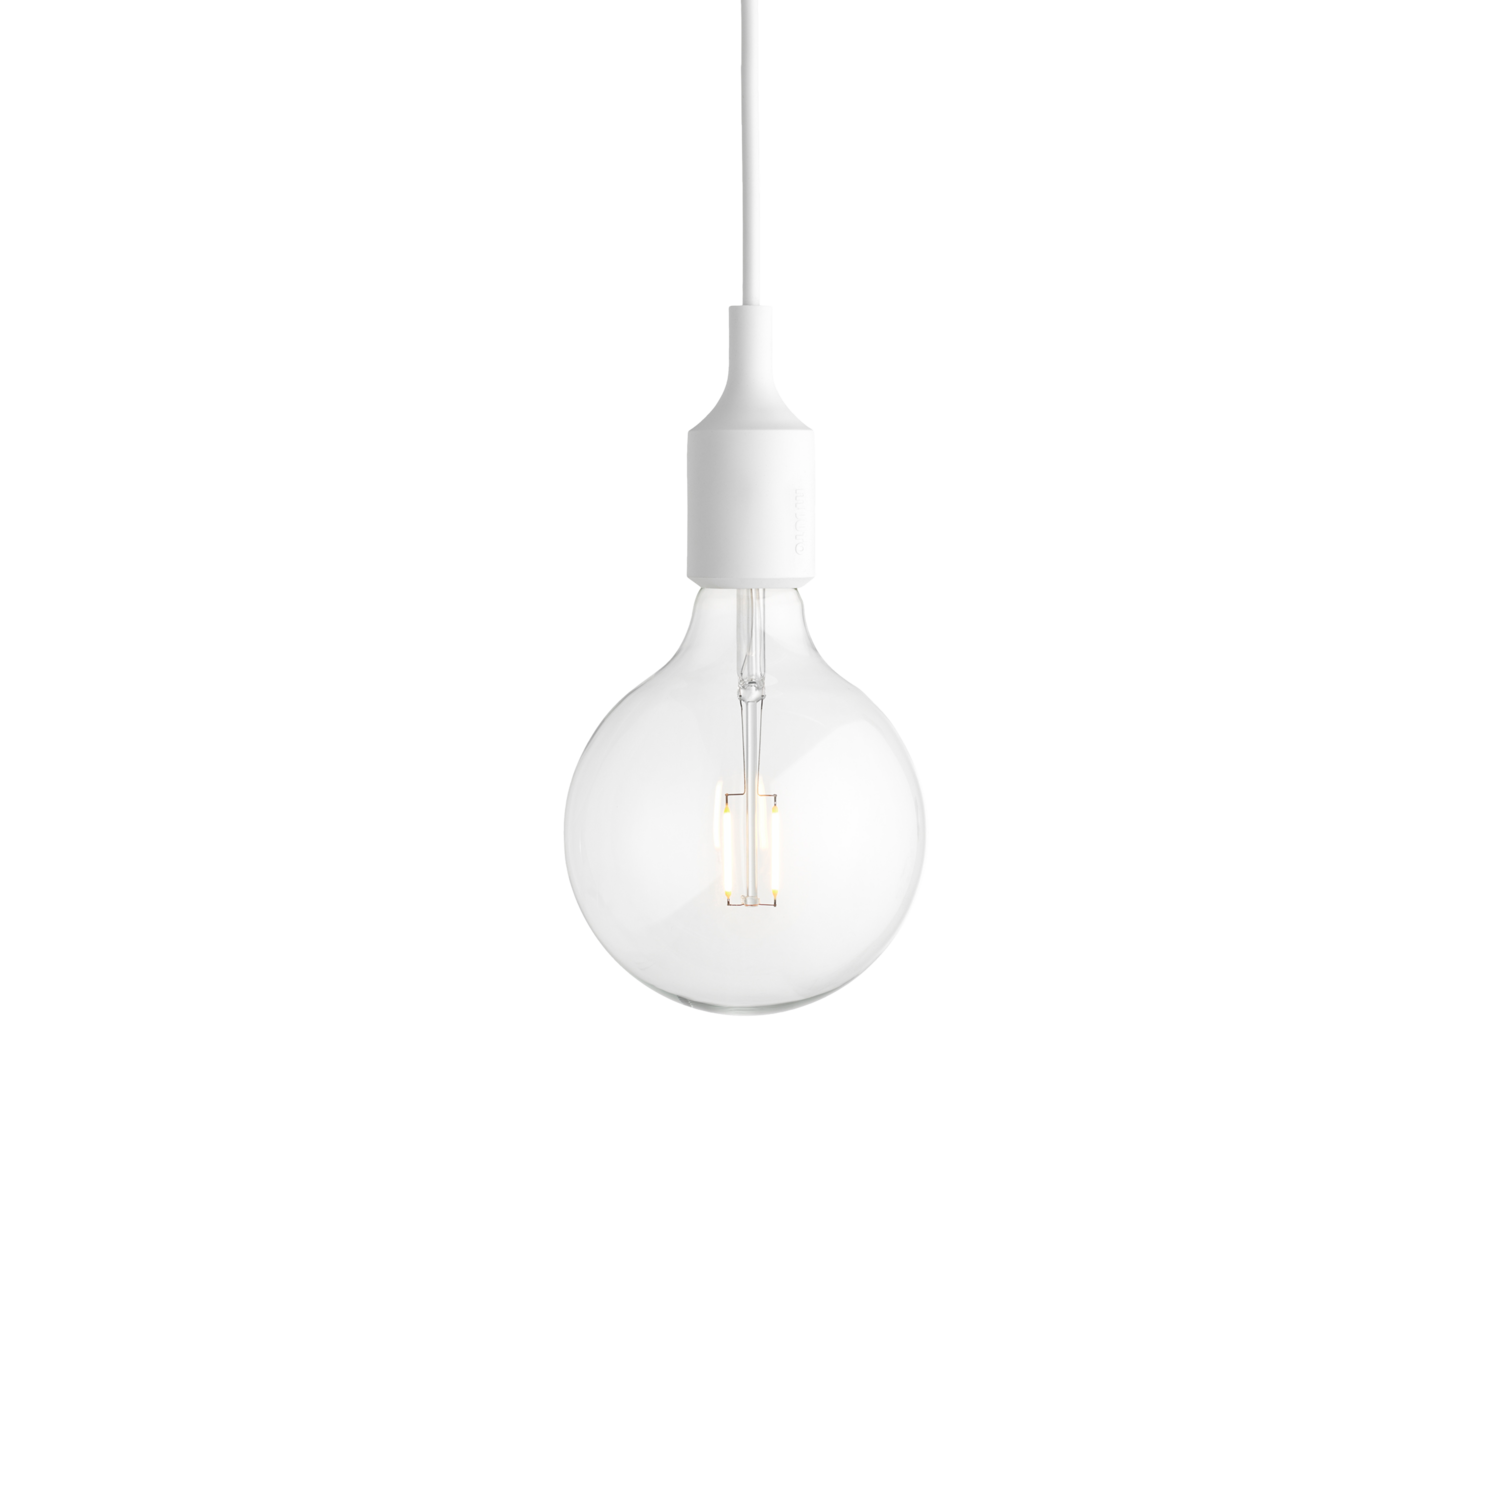 imod Shining Tilpasning E27 Pendant Lamp | Industrial style lamp that suits your needs